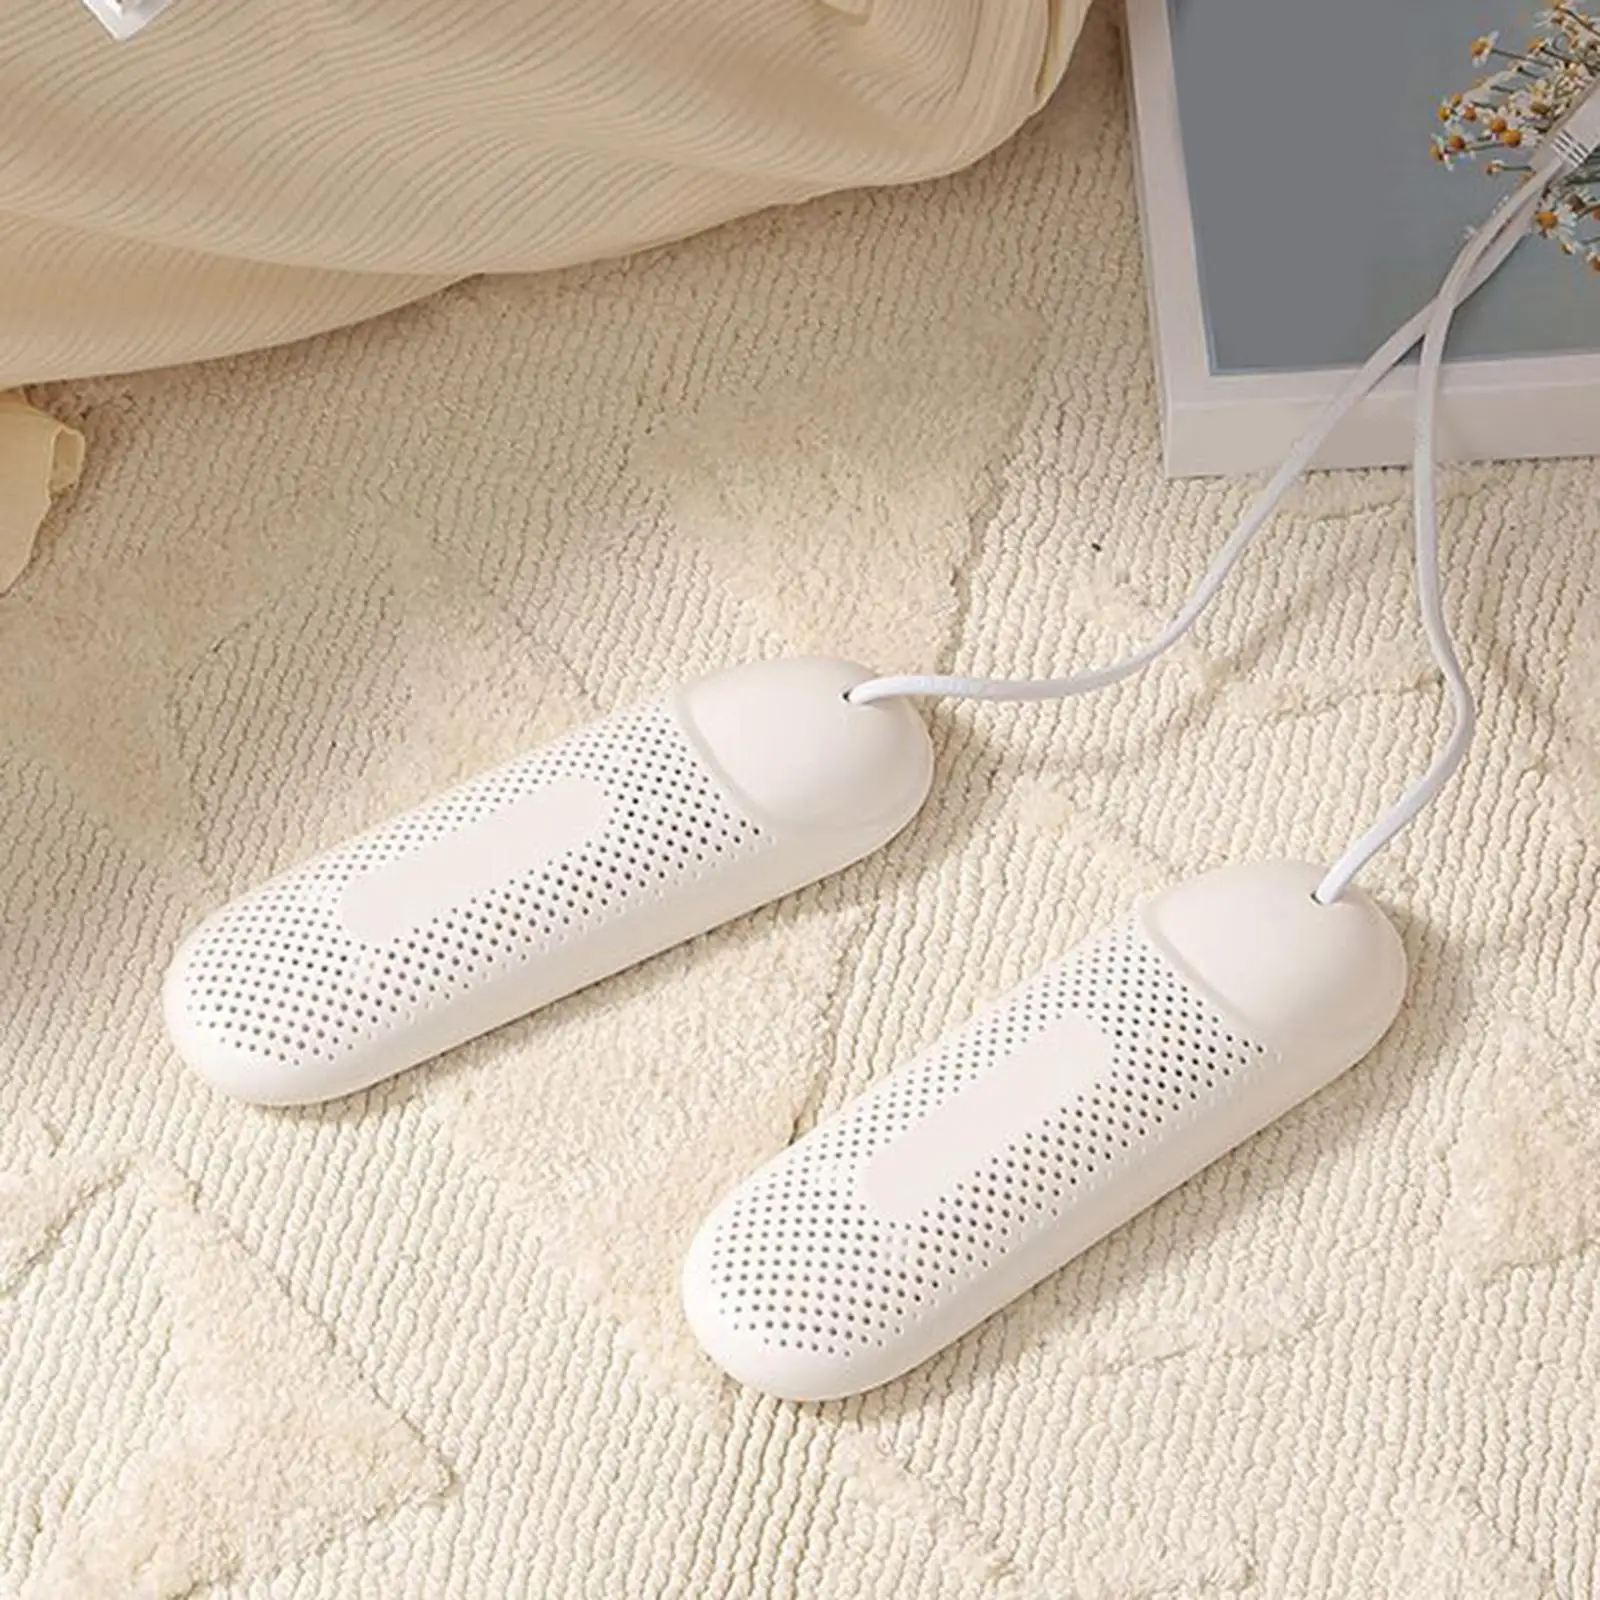 Portable Shoe Dryer Odor Deodorant Heater Warmer Boot Dehumidify Device Shoes Drier Foot Protector Electric for Household Family